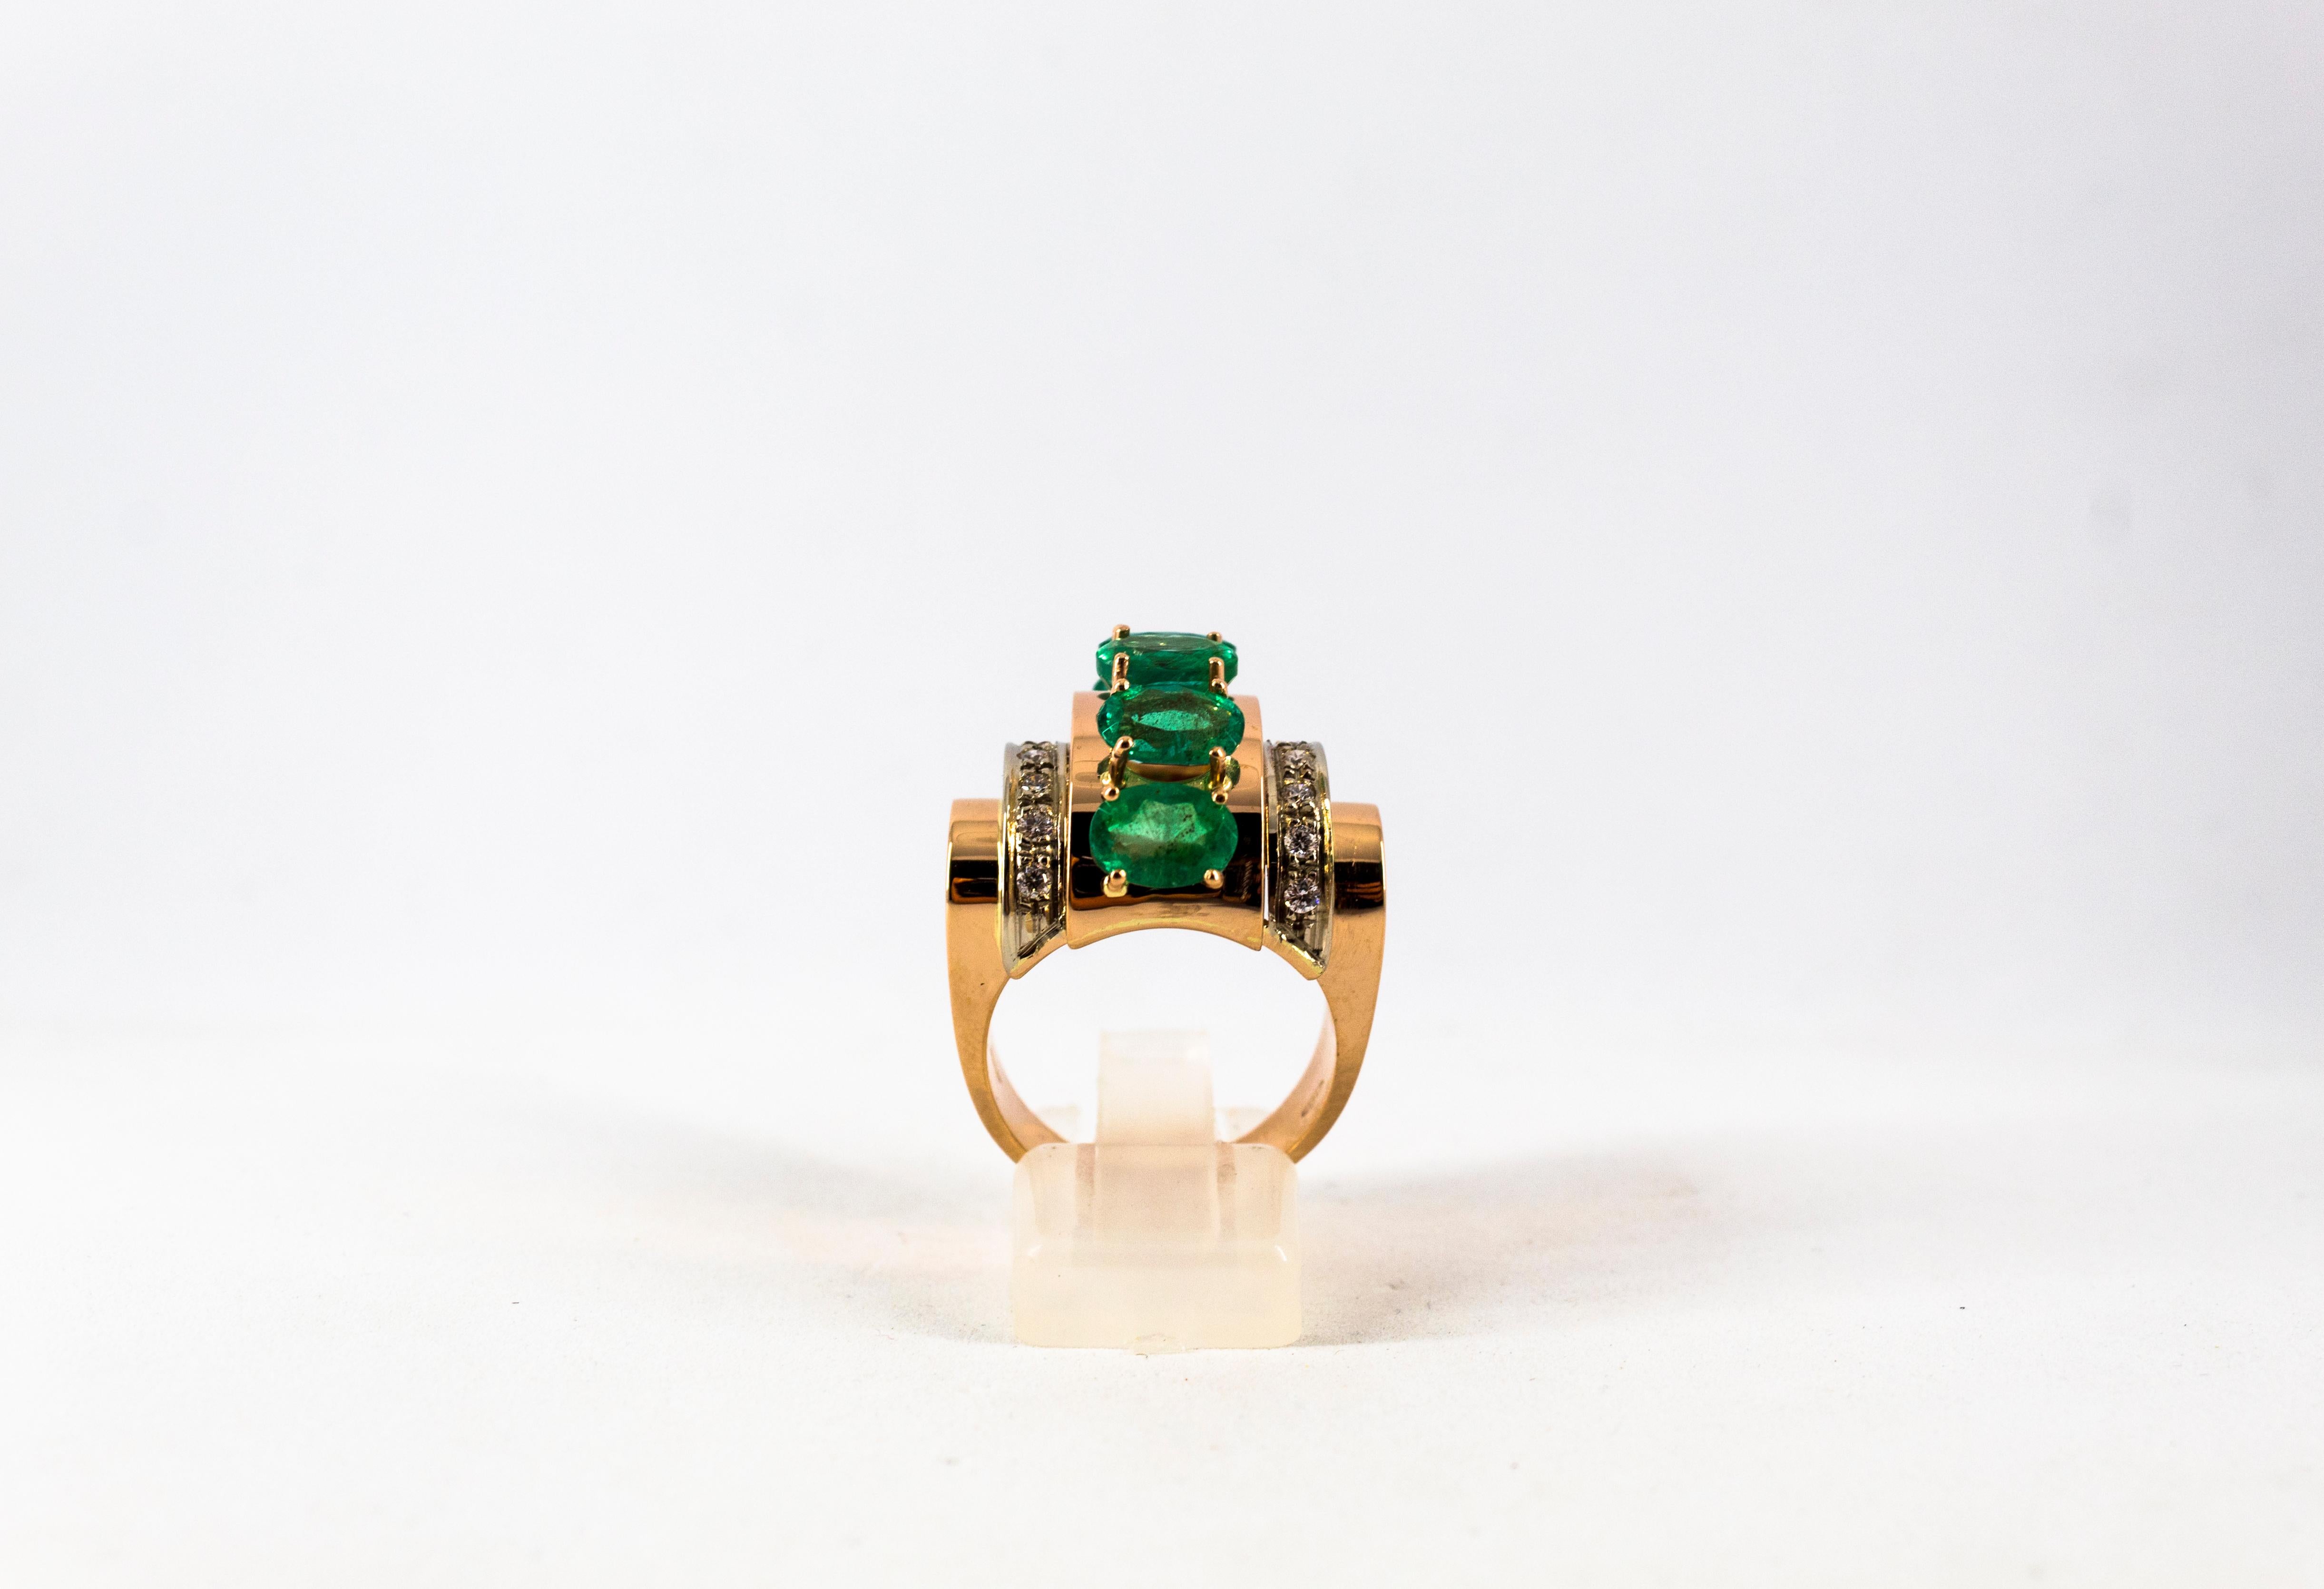 This Ring is made of 14K Yellow Gold.
This Ring has 0.30 Carats of White Brilliant Cut Diamonds.
This Ring has 4.00 Carats of Oval Cut Emeralds.
This Ring is available also with Rubies or Blue Sapphires.
Size ITA: 19 USA: 8 3/4

We're a workshop so